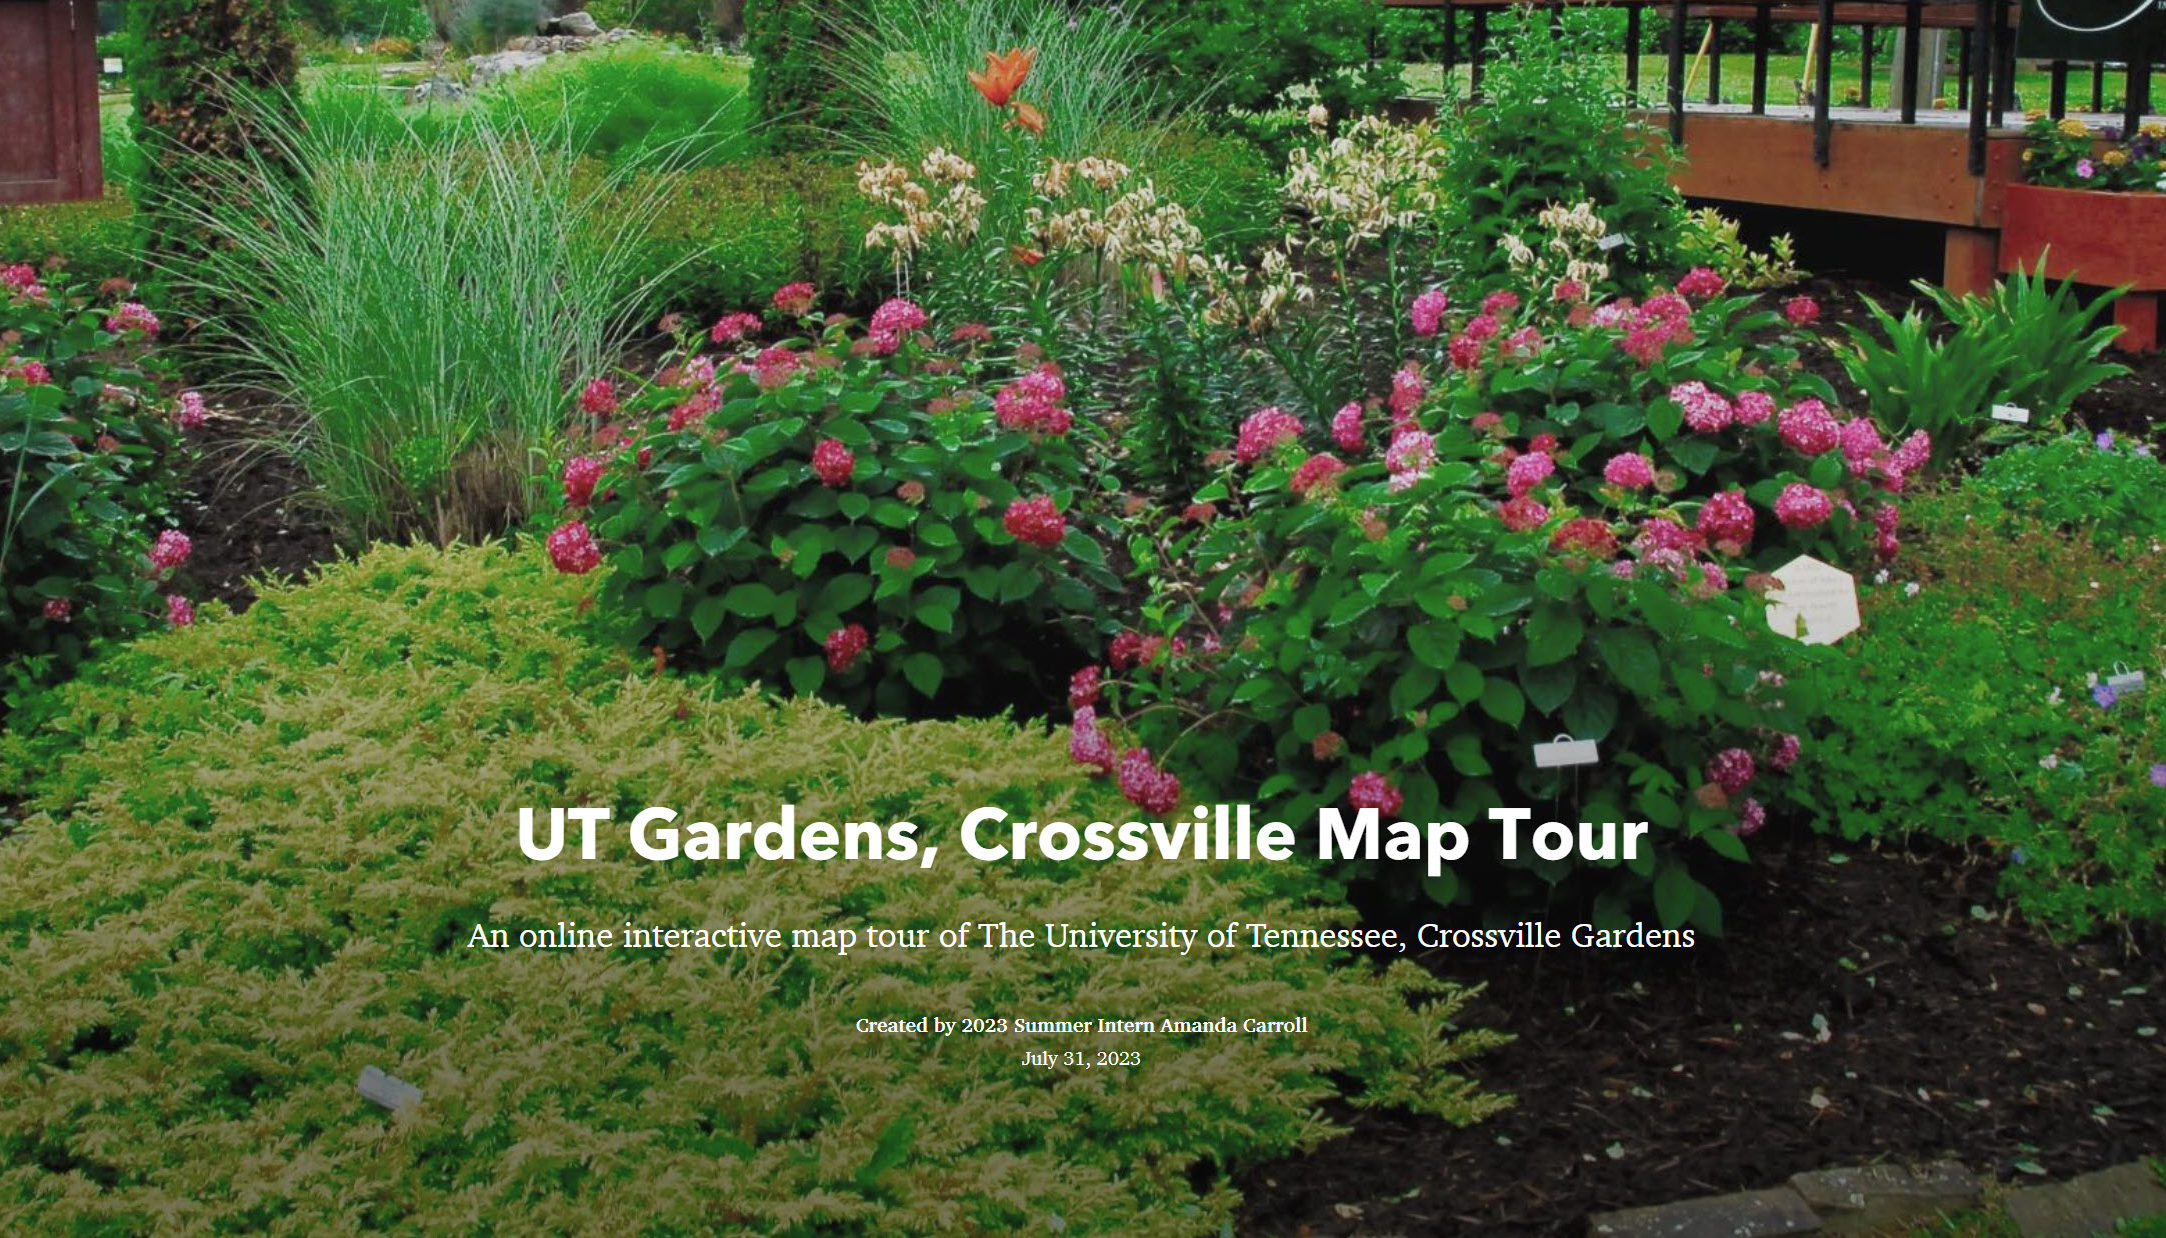 UT Gardens, Crossville Map Tour cover photo showing a variety of plants in bloom.